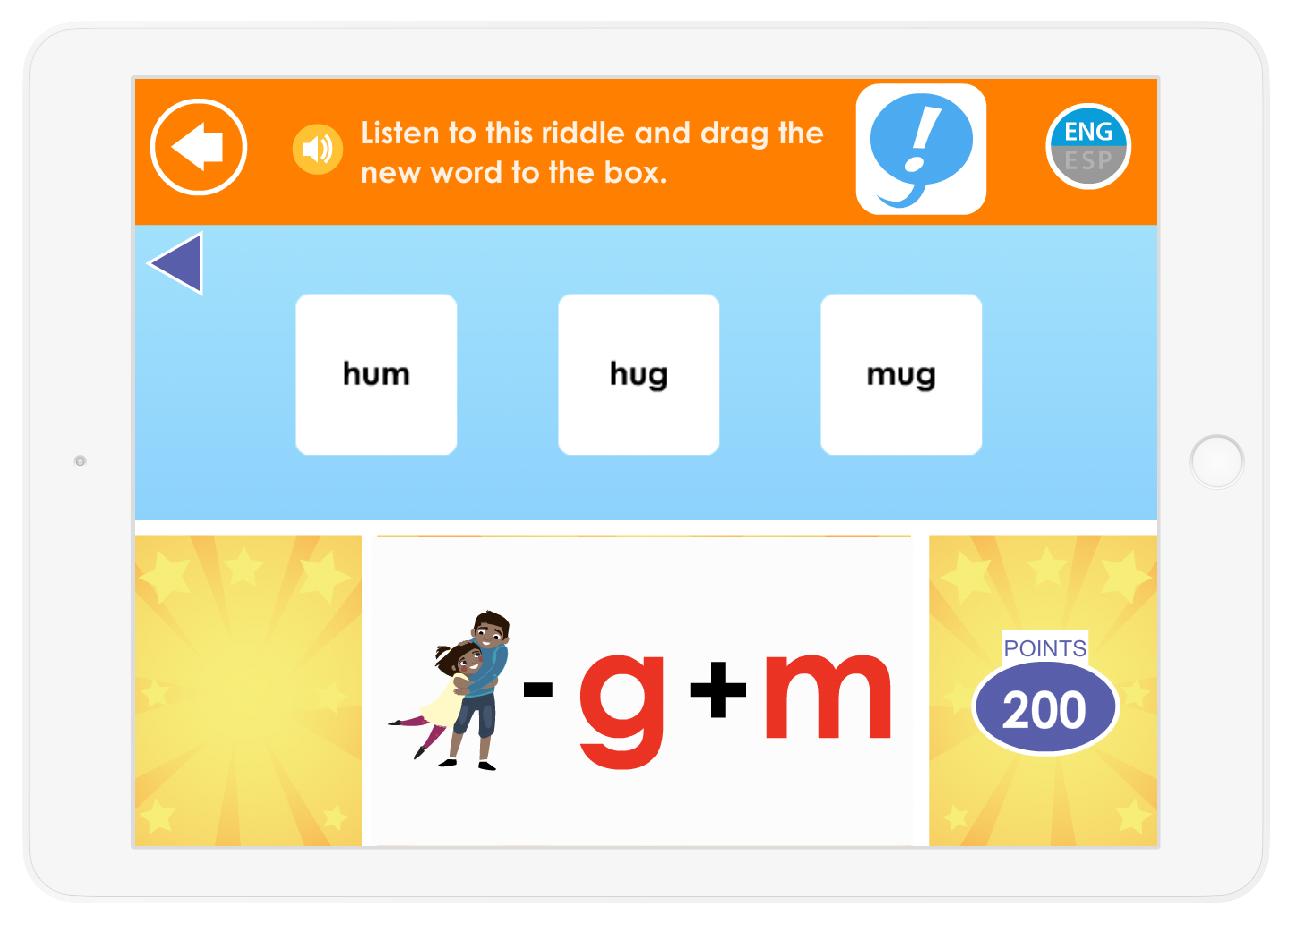 Practice advanced phonemic awareness skills such as adding and removing sounds in words to make new words.